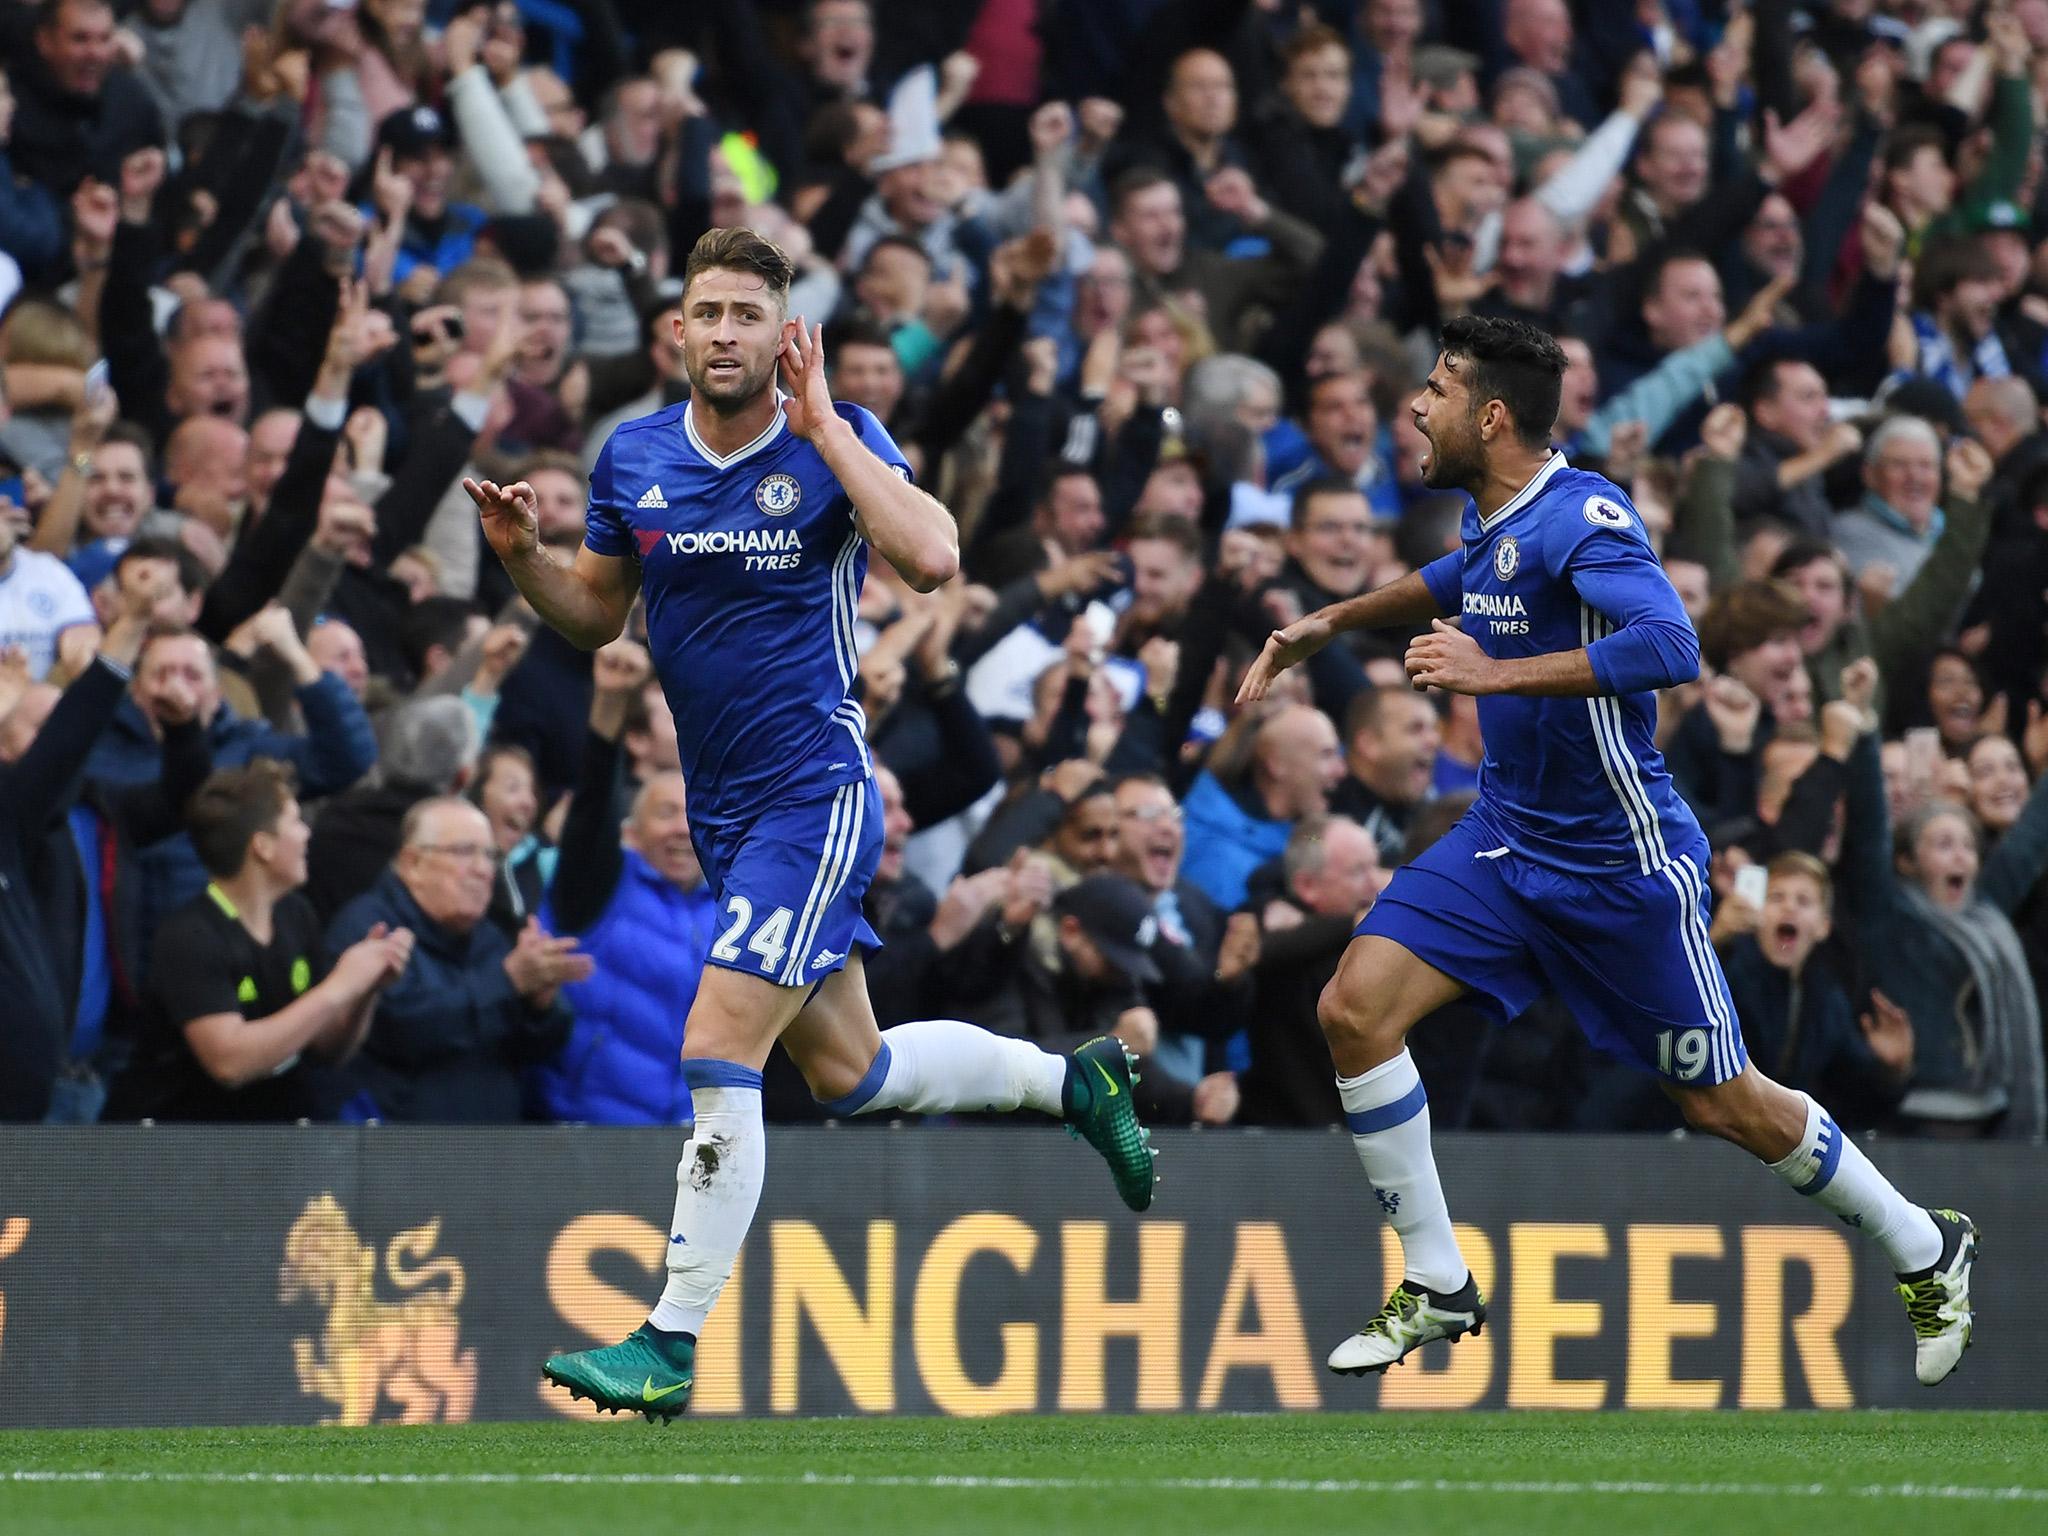 Gary Cahill celebrates after scoring the second